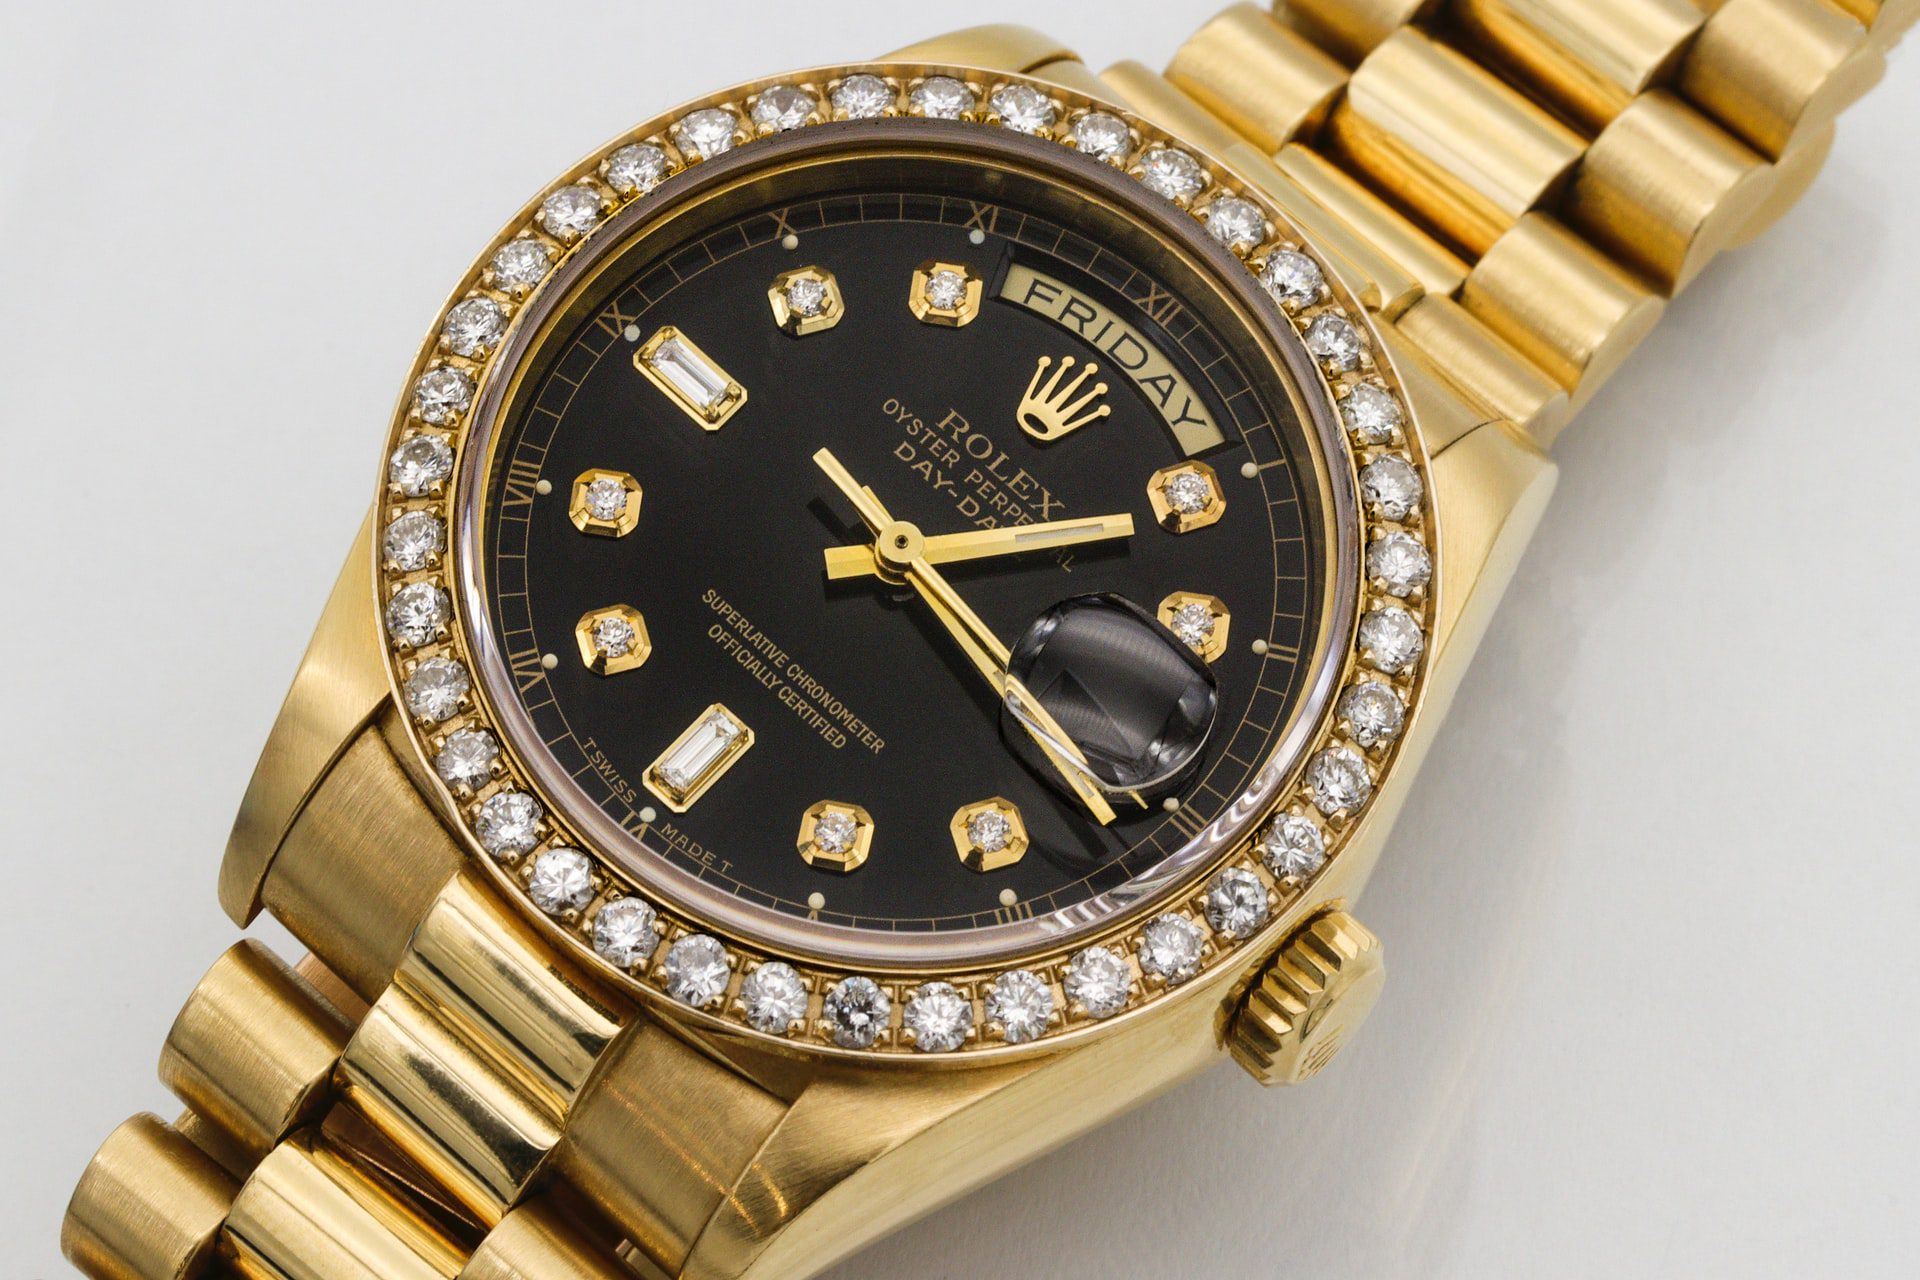 Why Rolex Watches are Worth the Investment